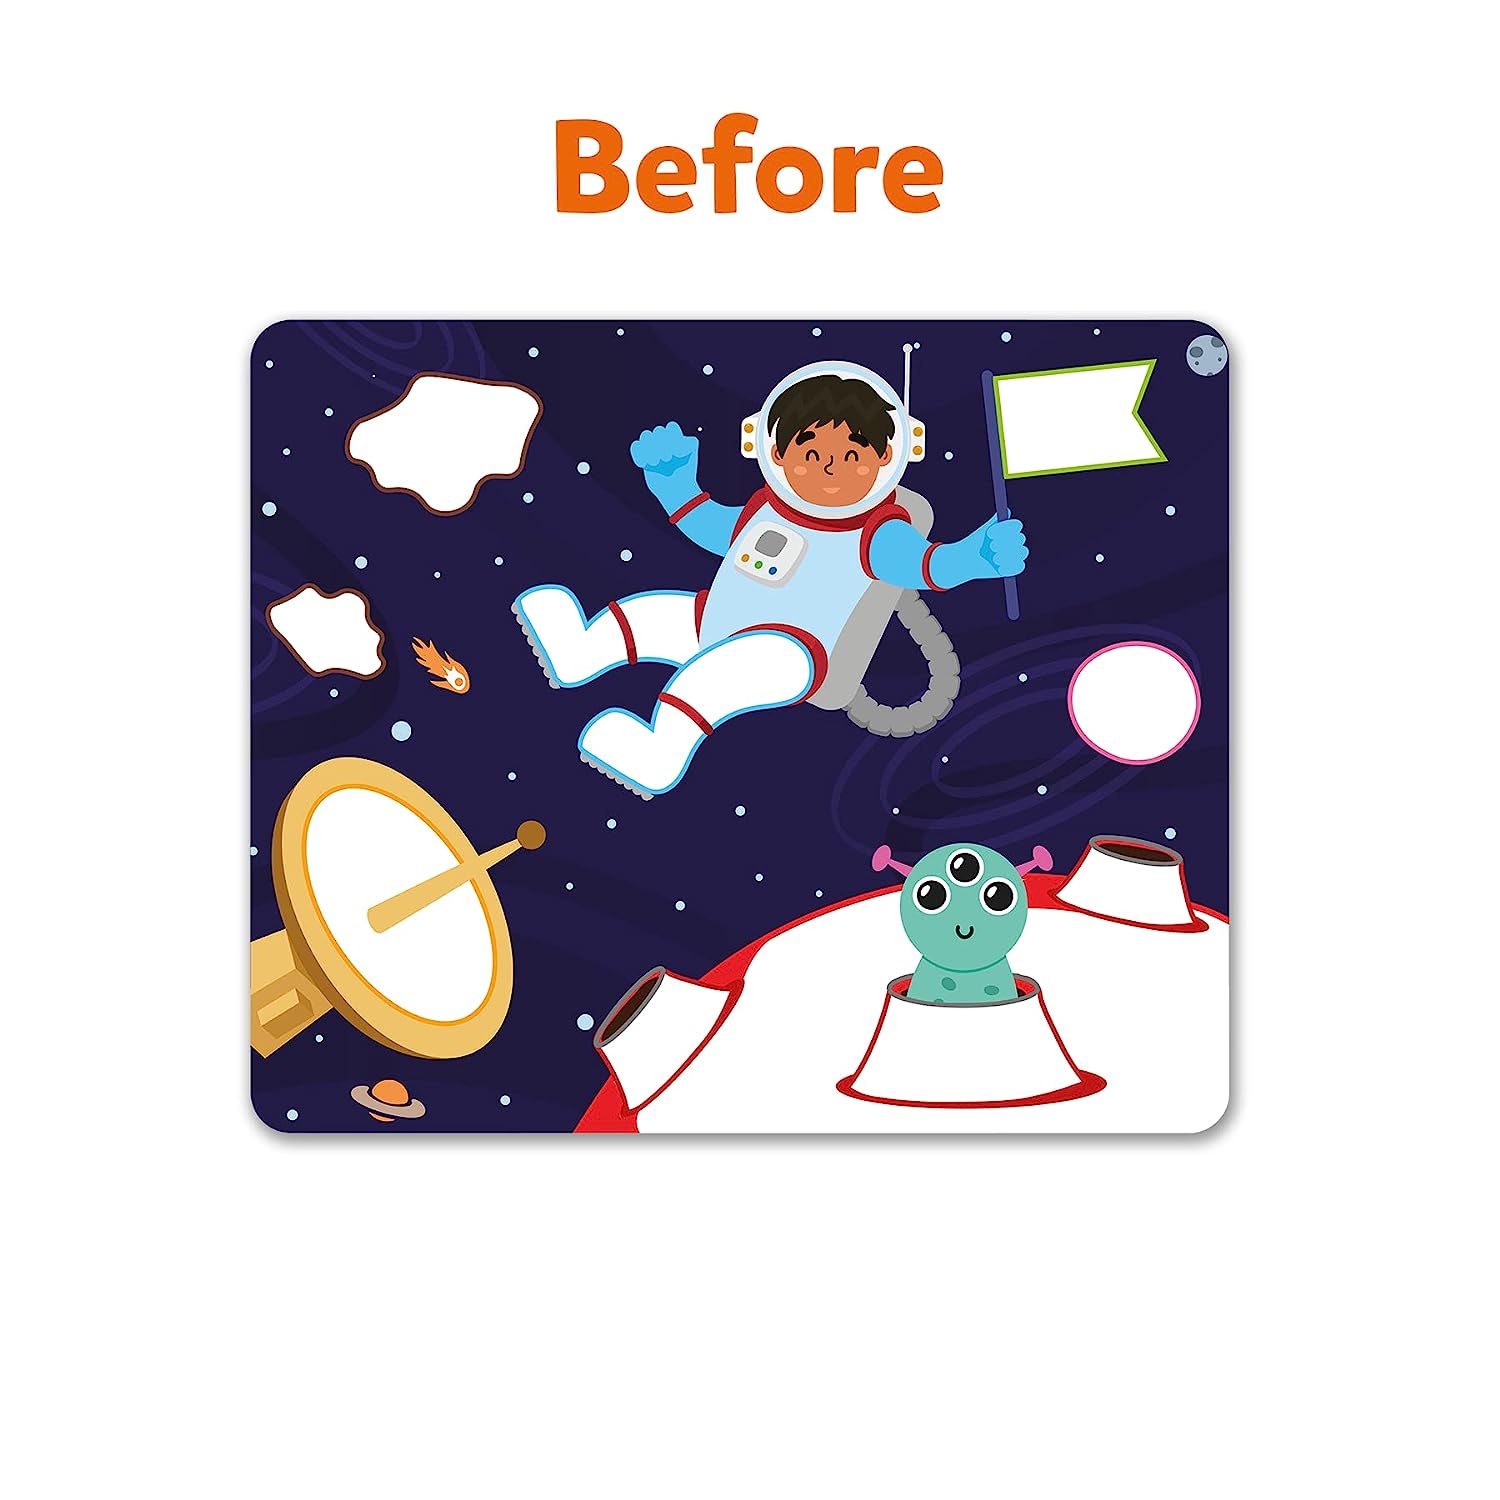 Skillmatics Dot It Outer Space - No Mess Sticker Art Gift Kit for Ages 3-7 Years